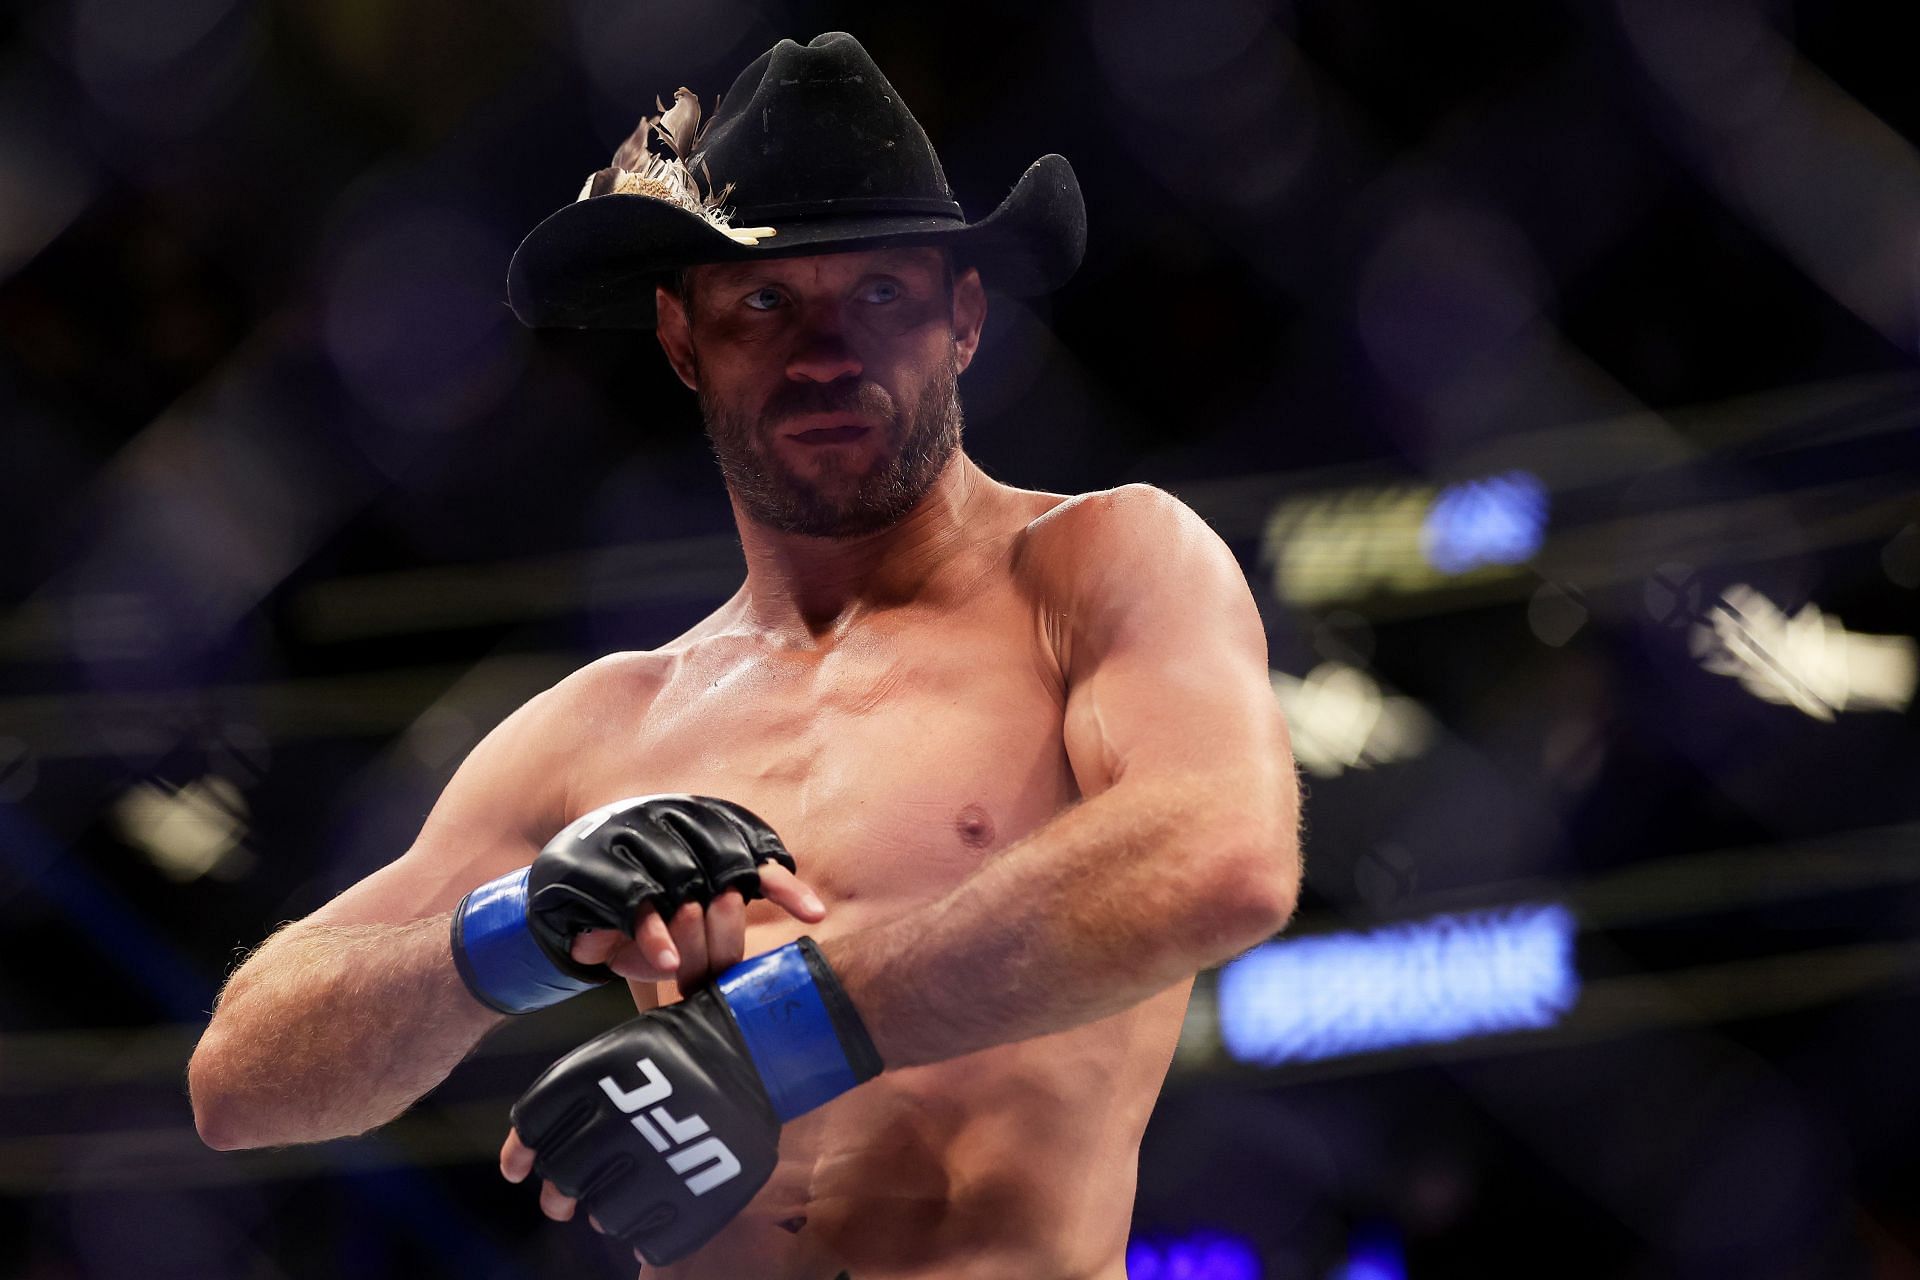 Donald Cerrone announced his intention to now pursue an acting career